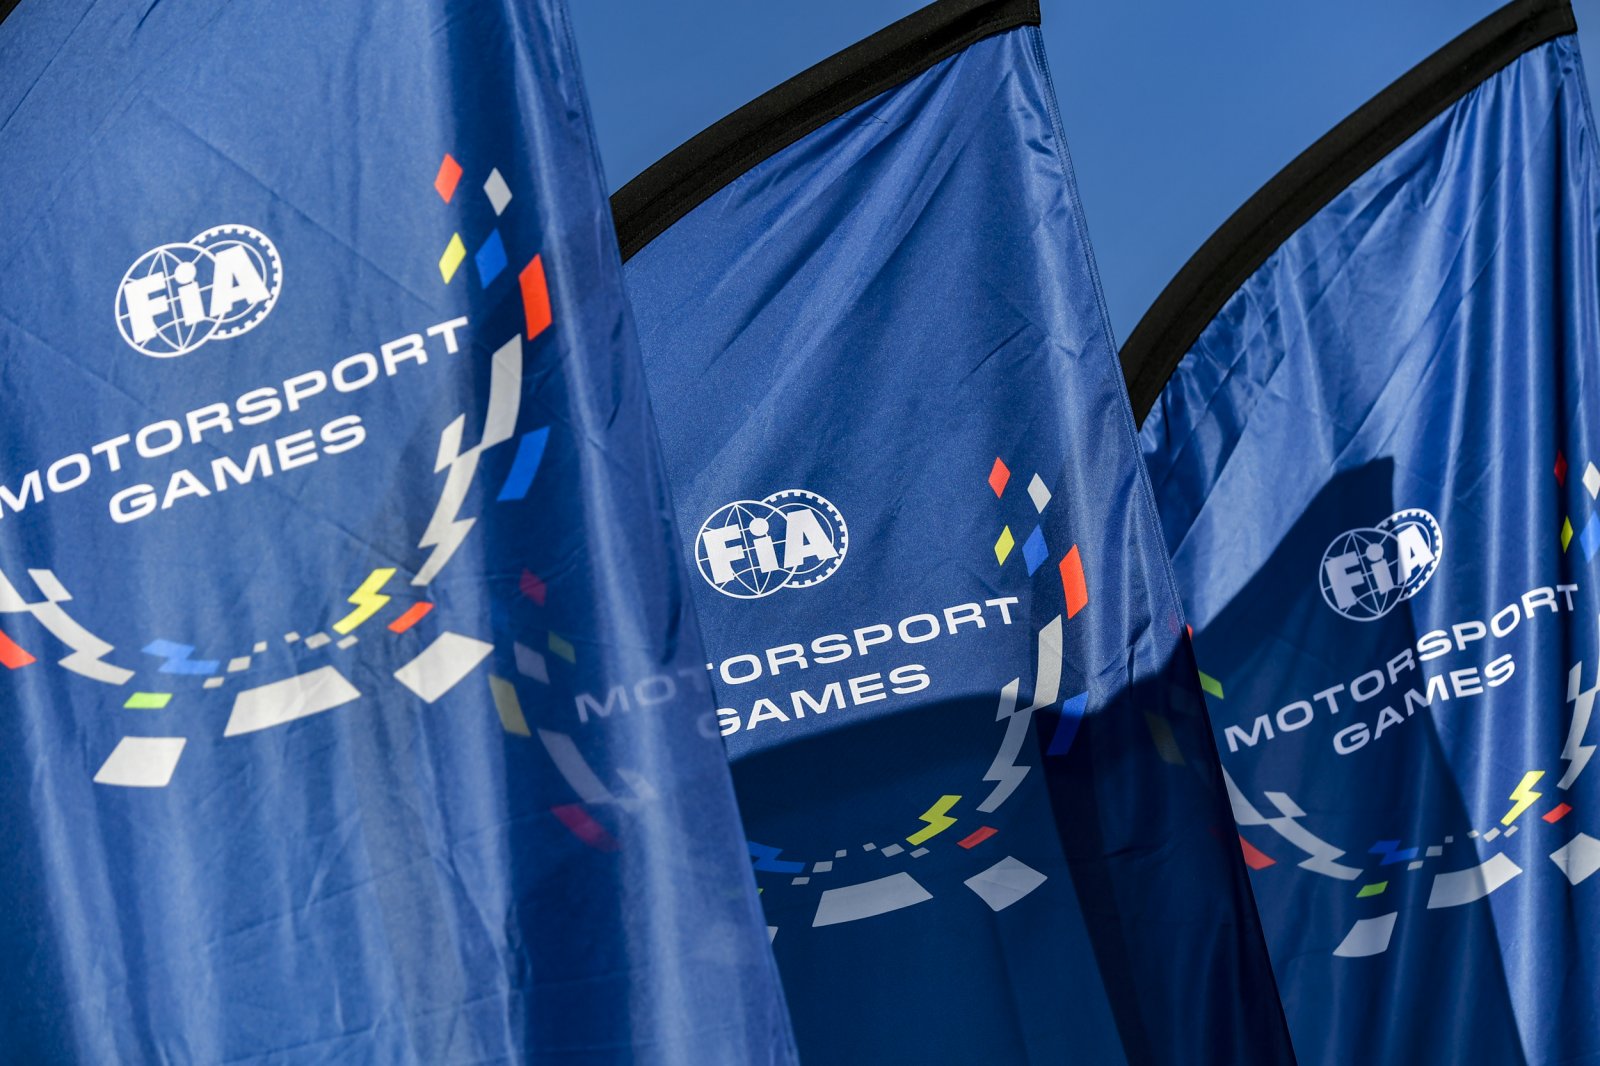 FIA Motorsport Games 2022 by the numbers